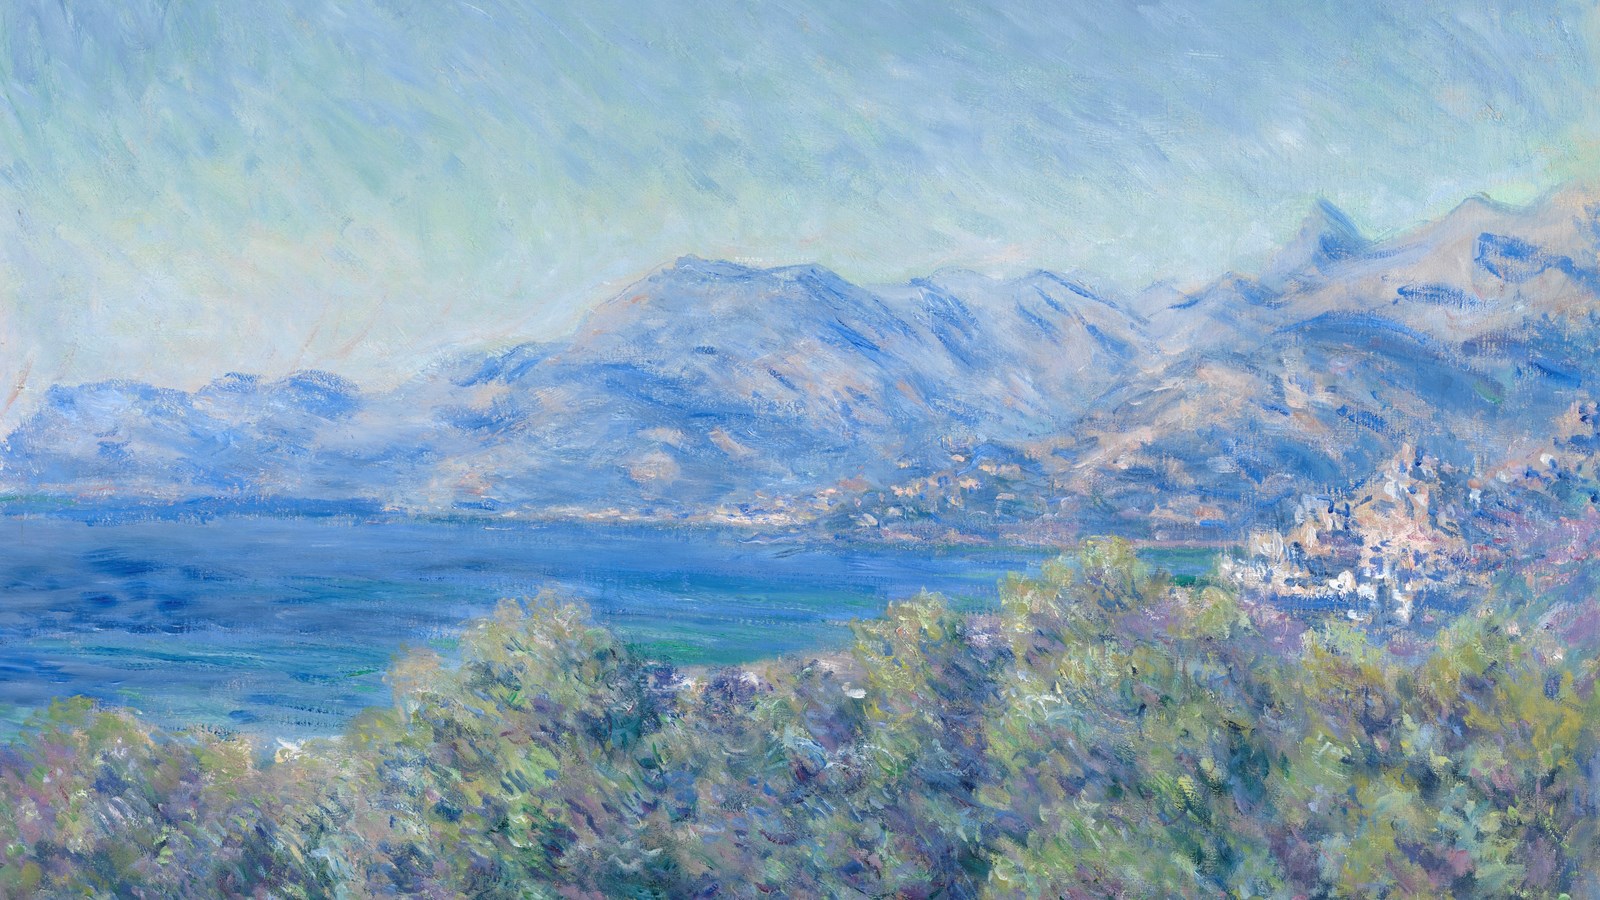 a painting of a Riviera scene showing the rolling foothills along the waterfront from a wooded hilltop. The sky is blue and the sun is casting shadows across the hills.